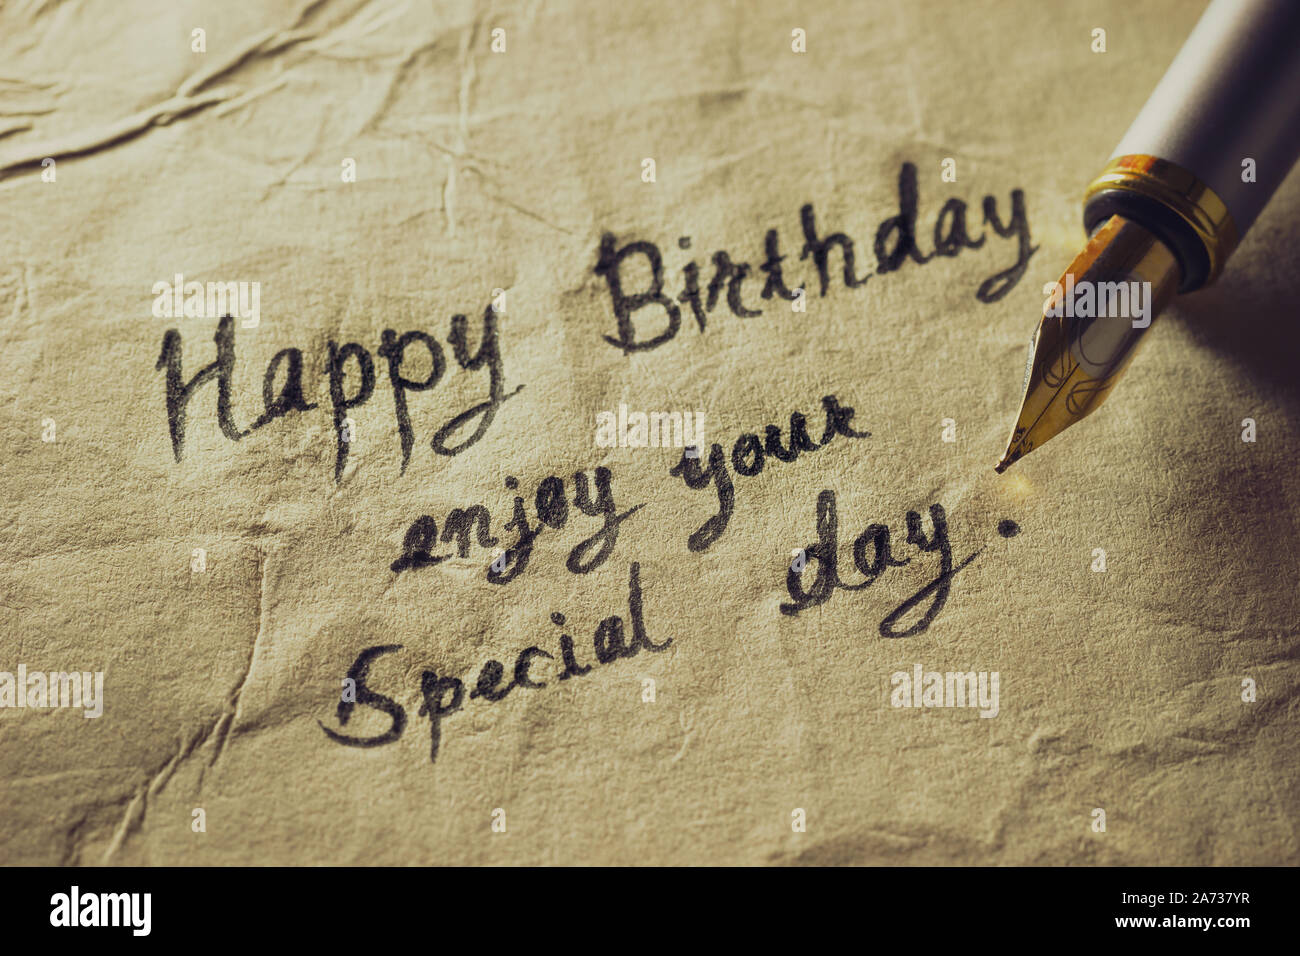 Happy birthday enjoy your special day. Vintage brass pen writing ...